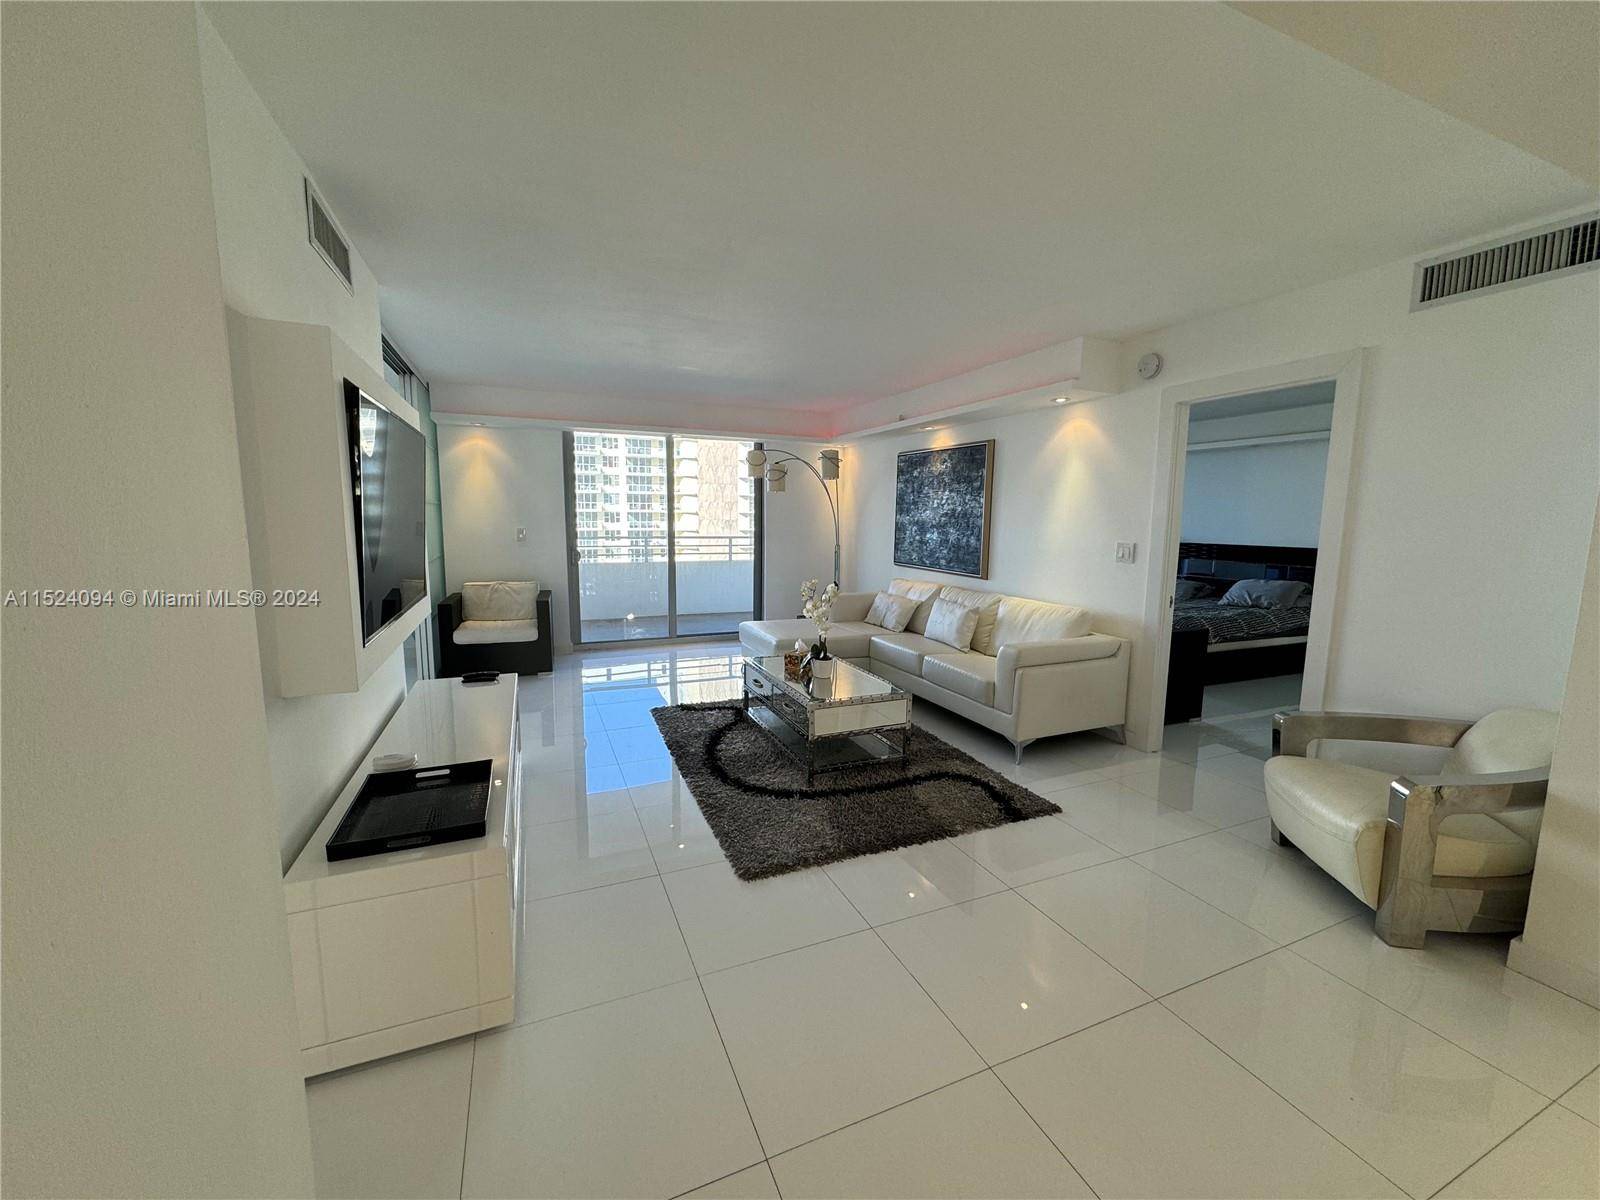 THIS BEAUTIFUL FURNISHED UNIT FEATURES 2 BED 2 BATH AN OPEN KITCHEN AND A LARGE PRIVATE BALCONY.